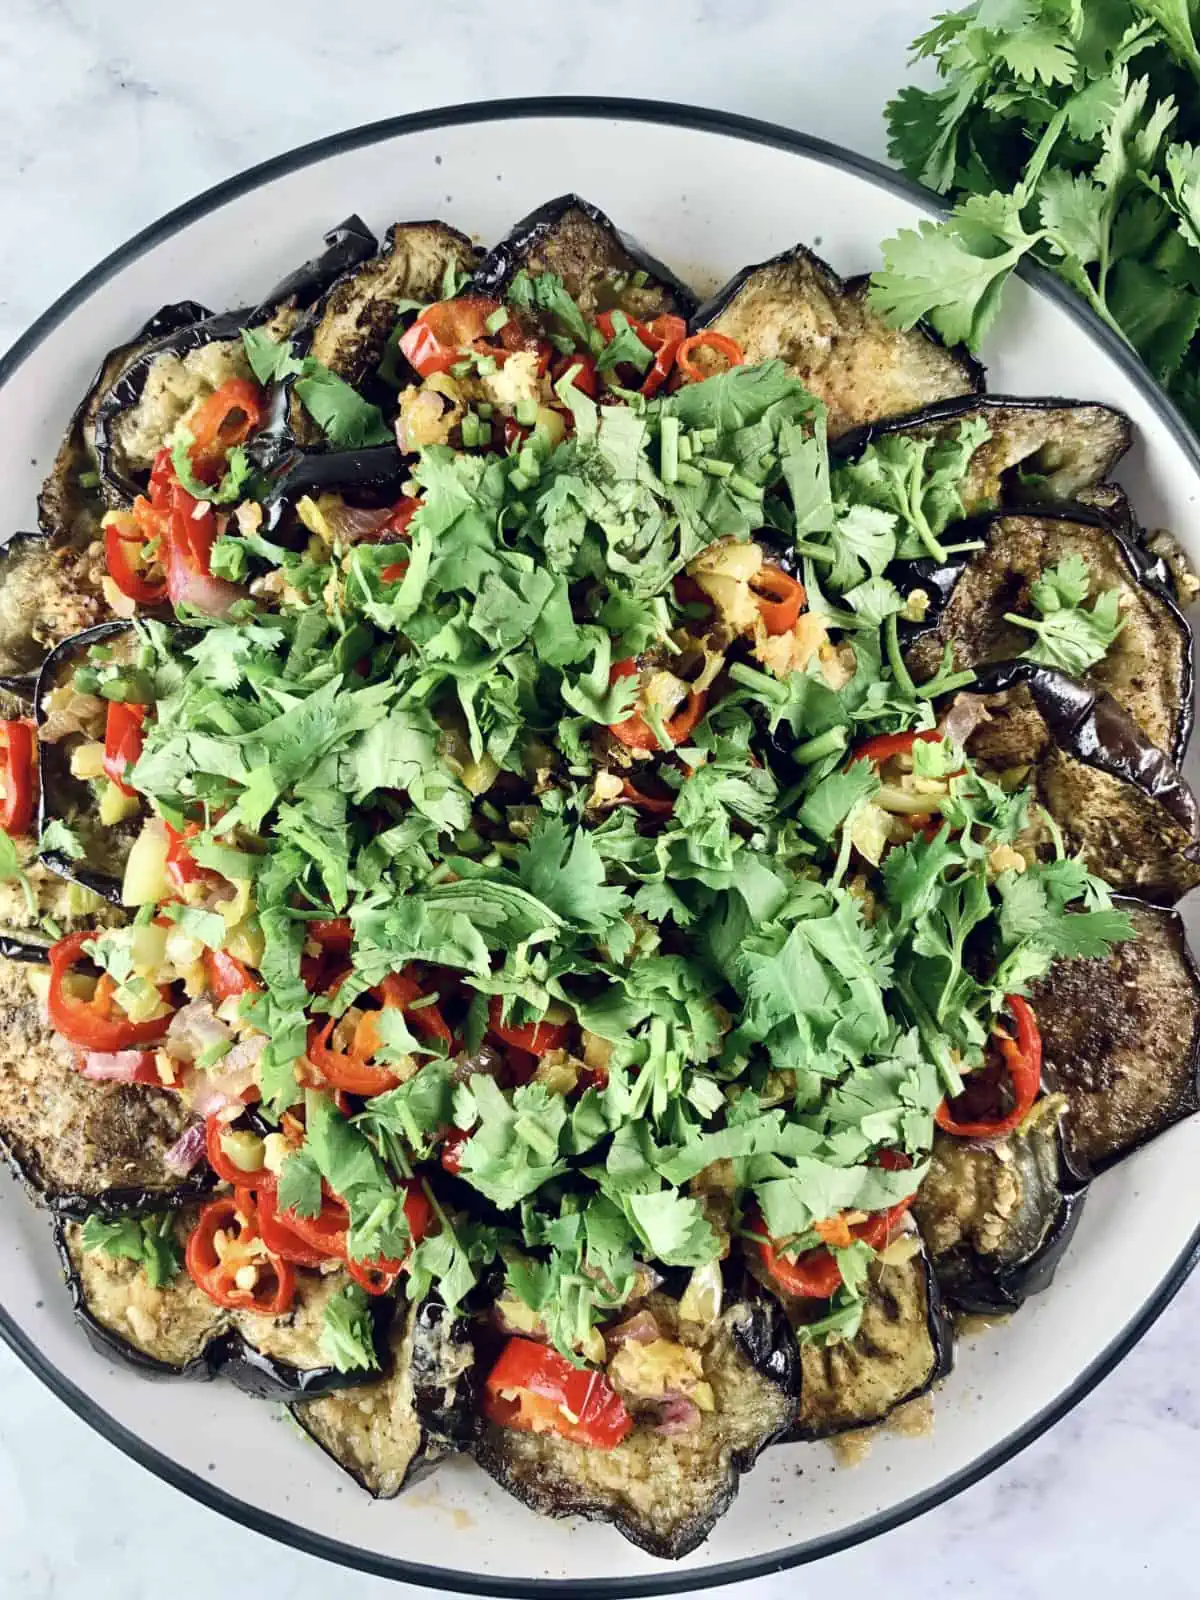 Chinese Eggplant Salad with coriander on the side.